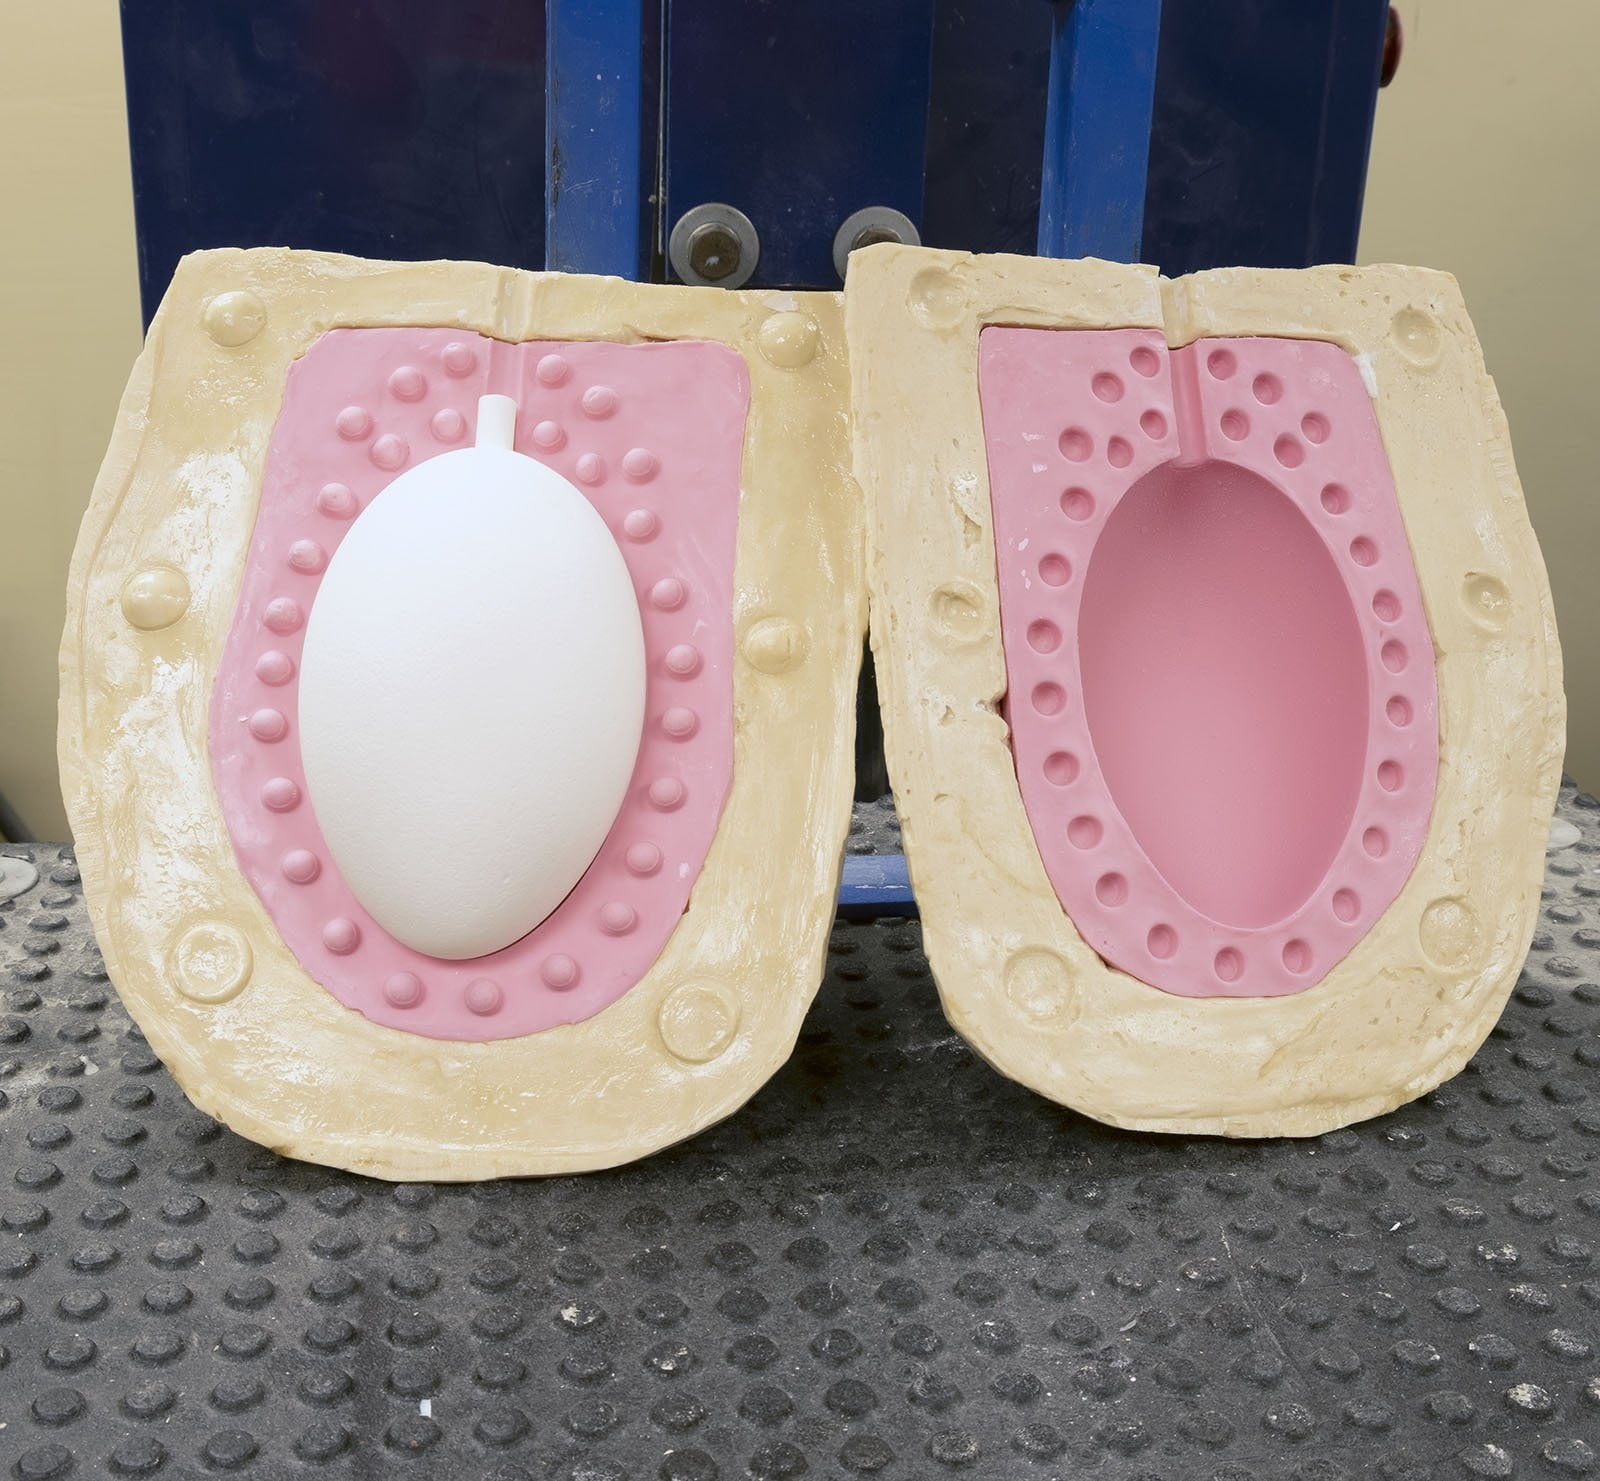 How to make an egg mold for resin? Silicone Mold 